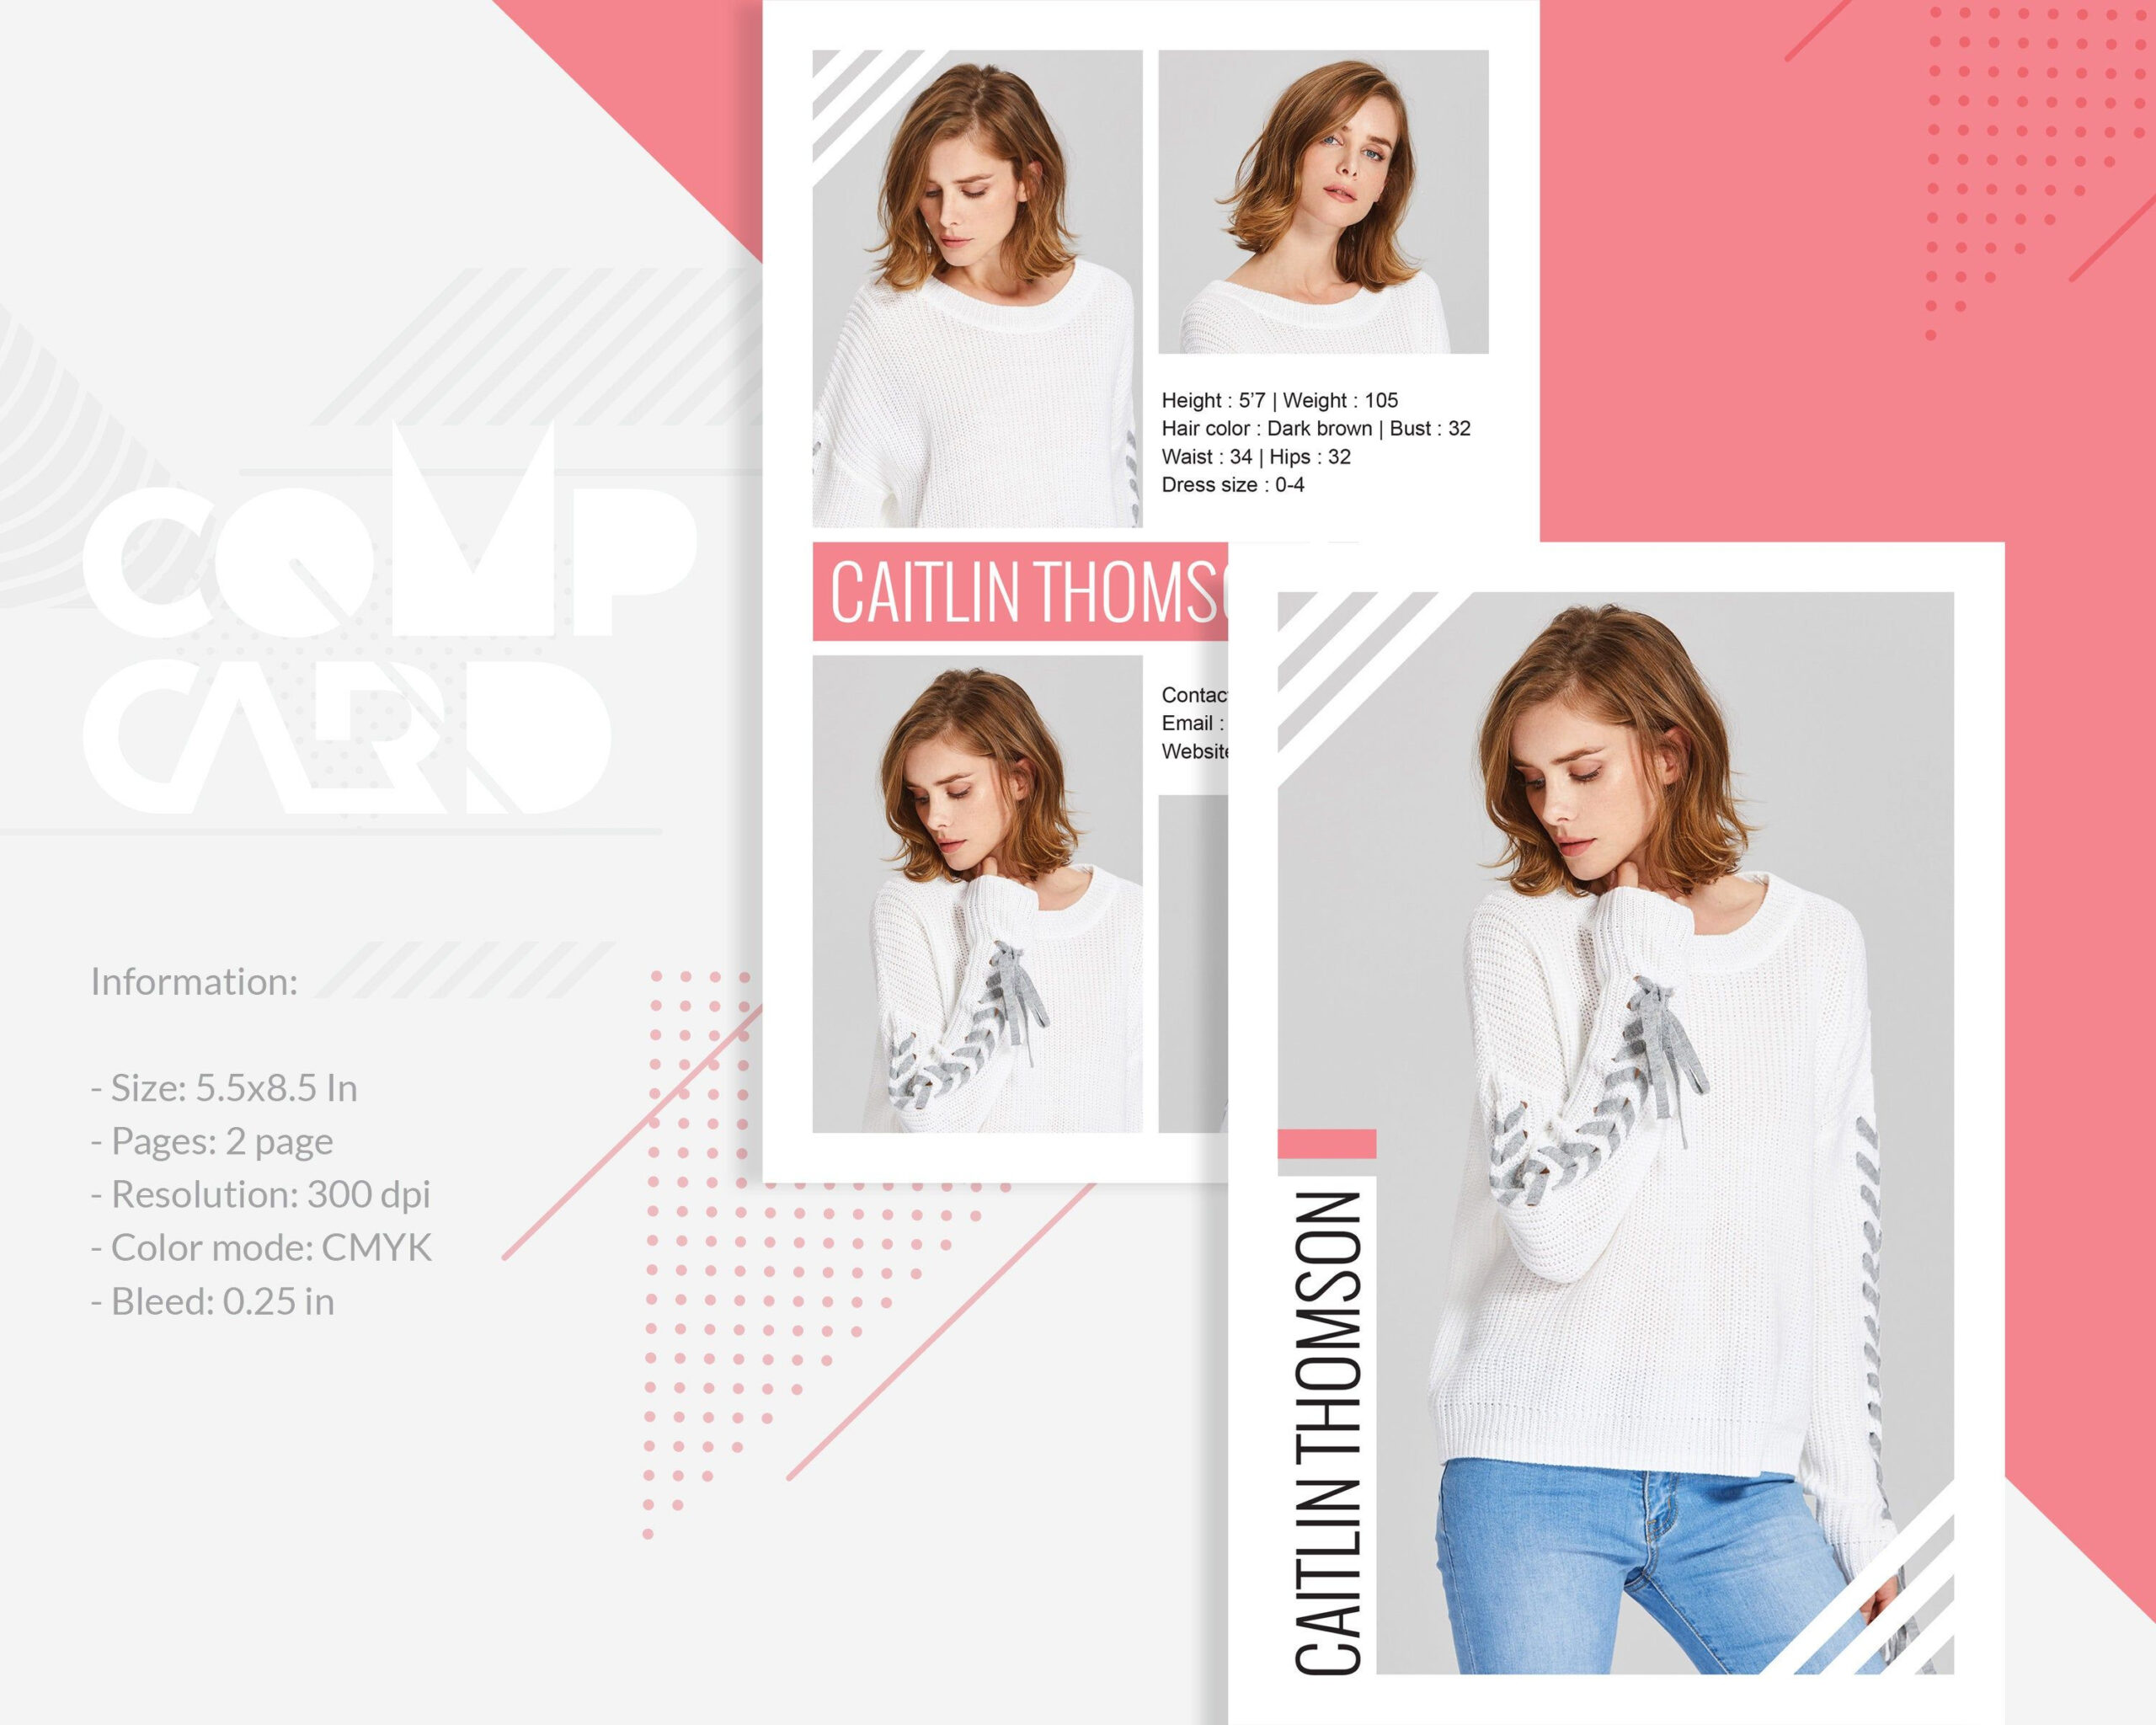 Modeling Comp Card | Fashion Model Comp Card Template For Download Comp Card Template